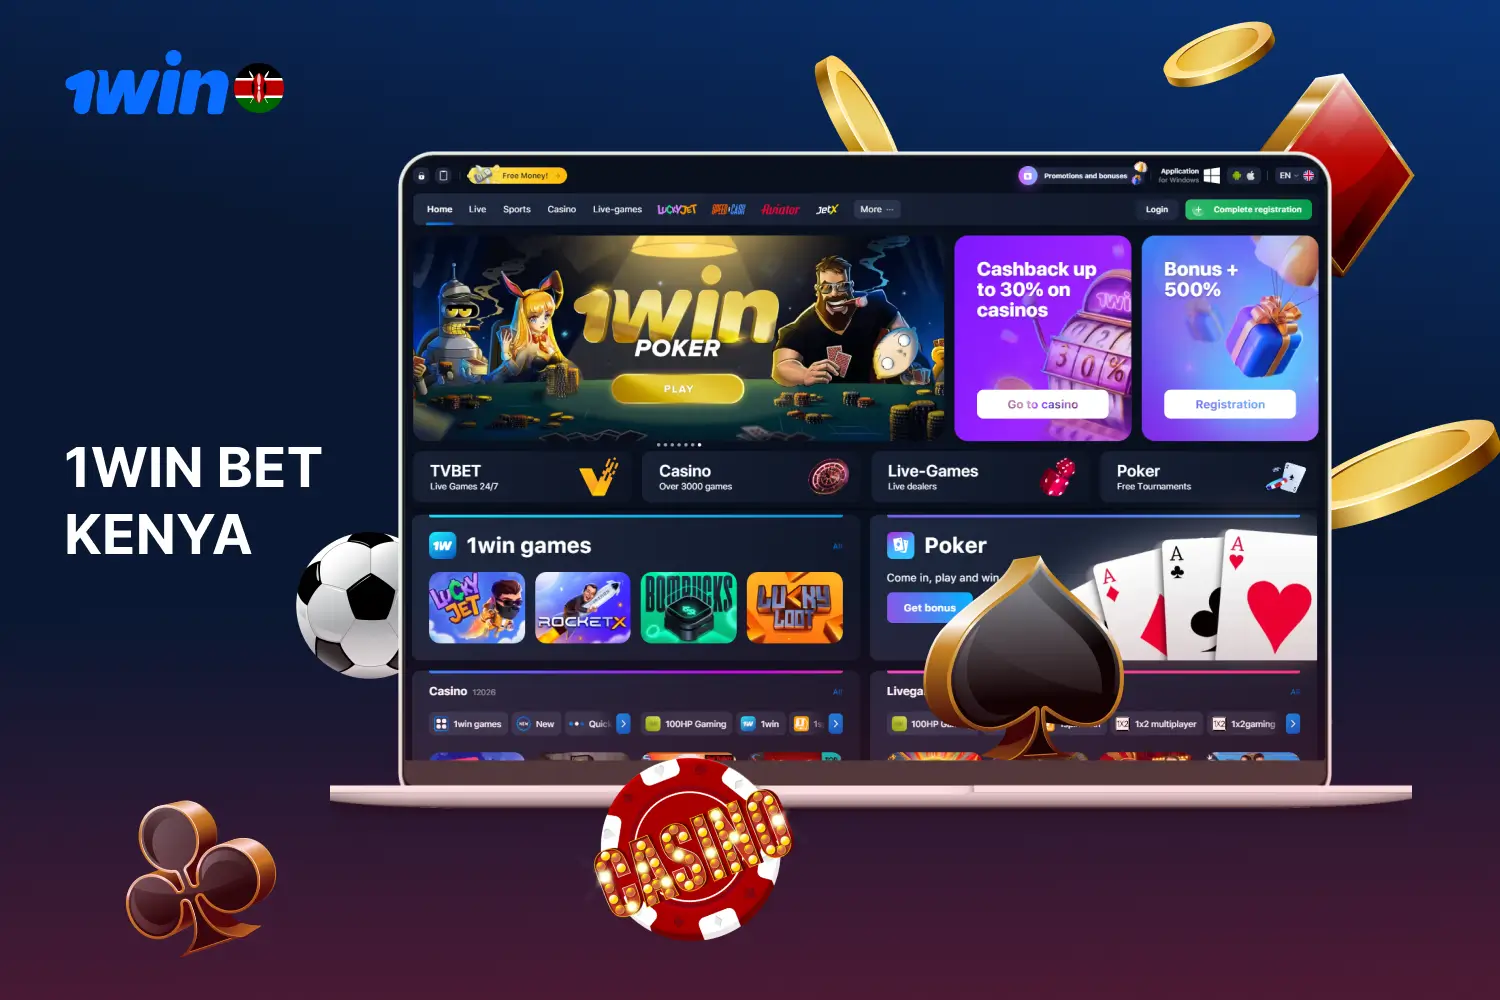 1win casino in Kenya offers online sports betting and hundreds of gambling activities to its users